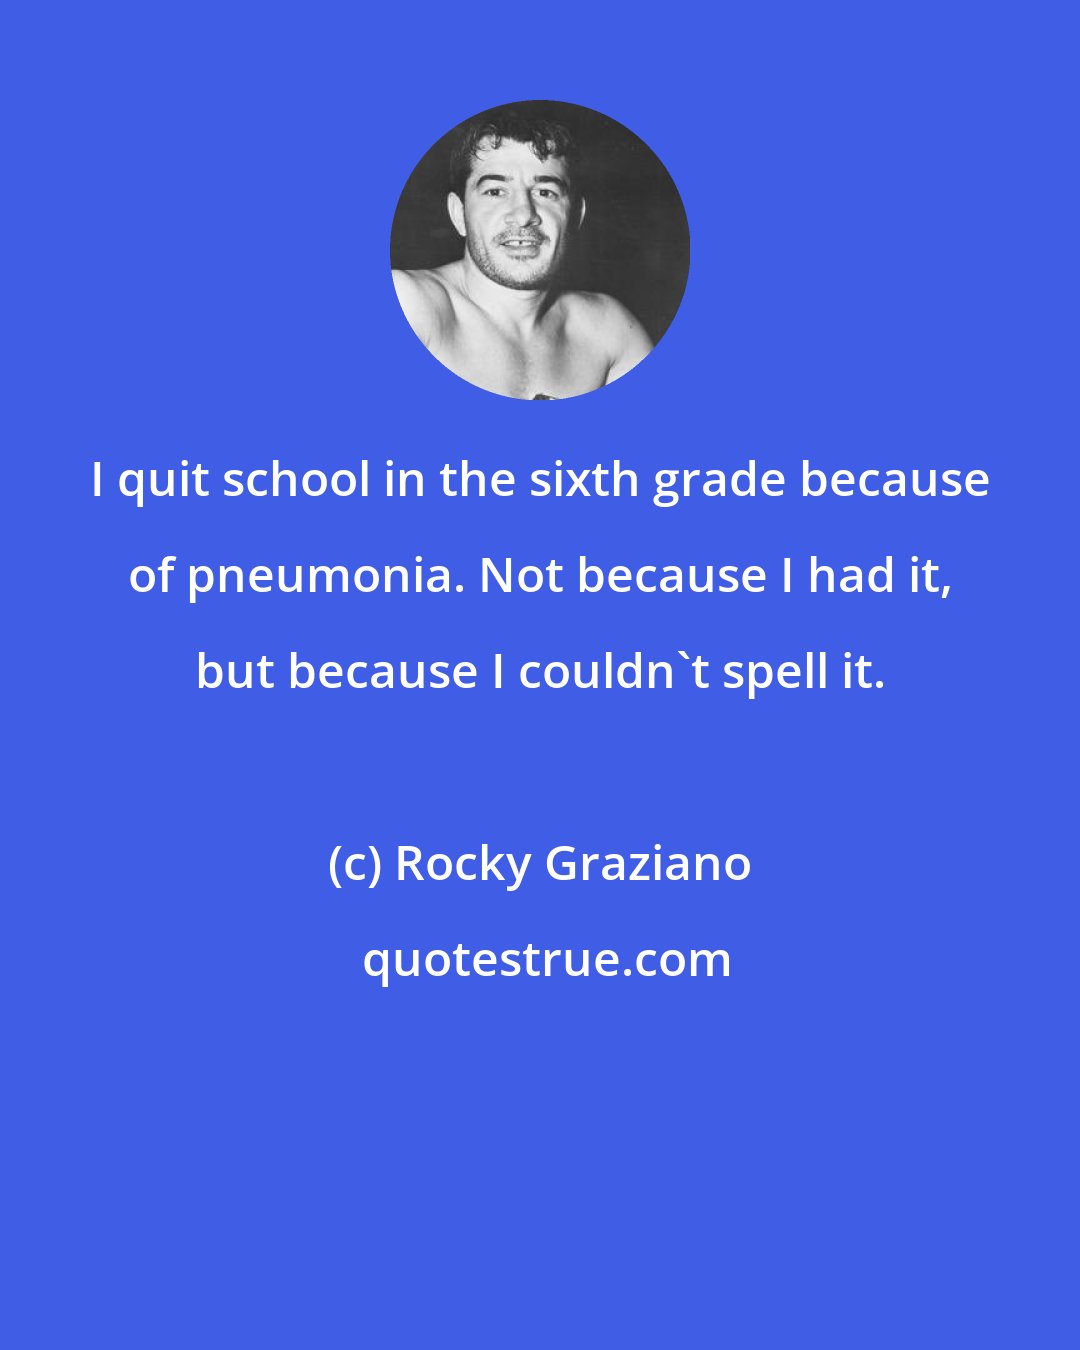 Rocky Graziano: I quit school in the sixth grade because of pneumonia. Not because I had it, but because I couldn't spell it.